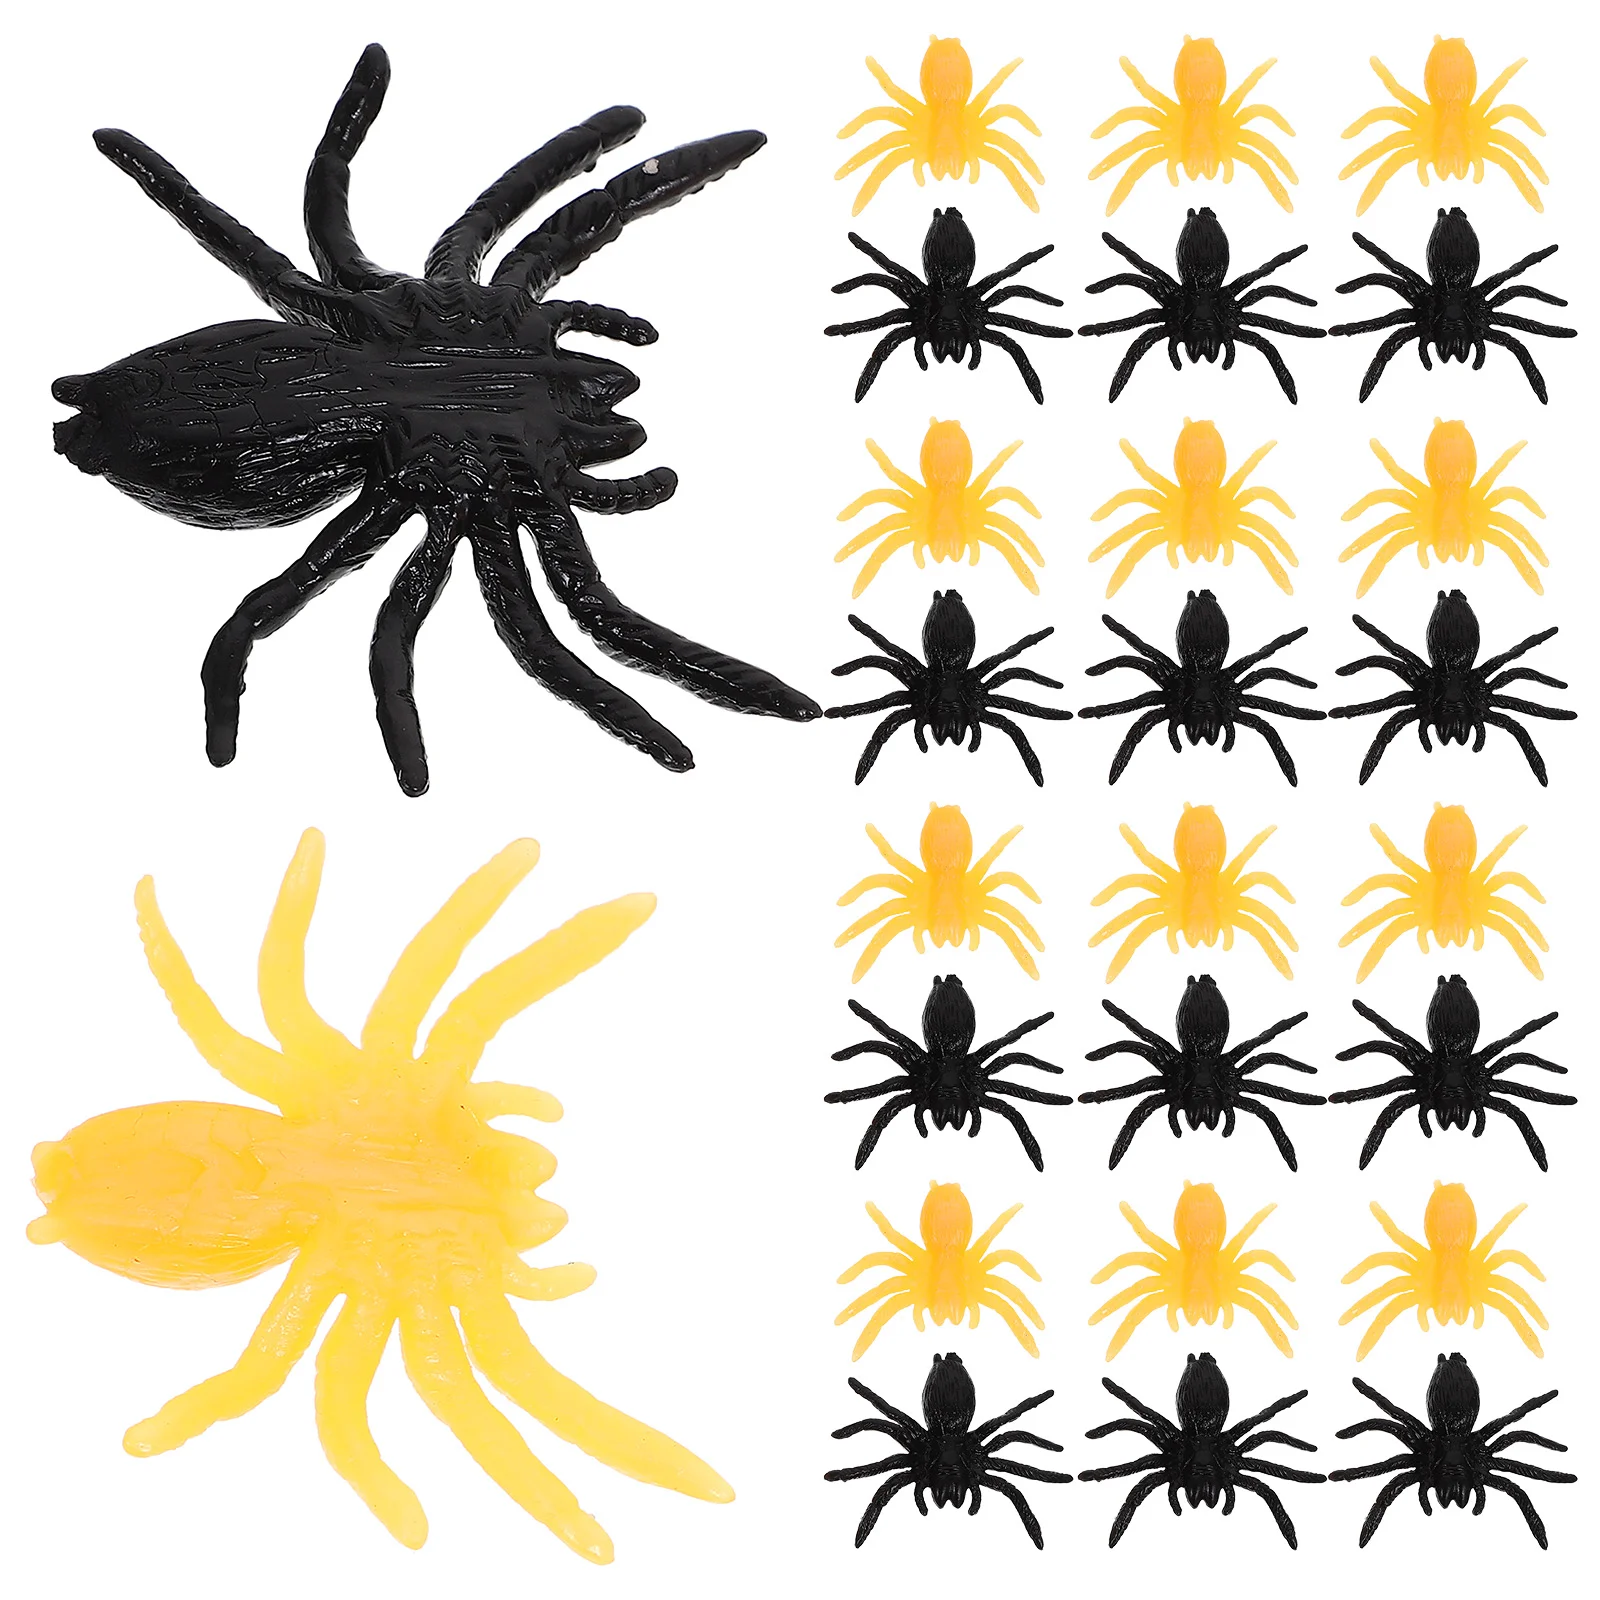 

100 Pcs Tpr Spider Plaything Decor Ornaments Soft Material Simulation Artificial Fake Prop Party Trick Mini Spiders